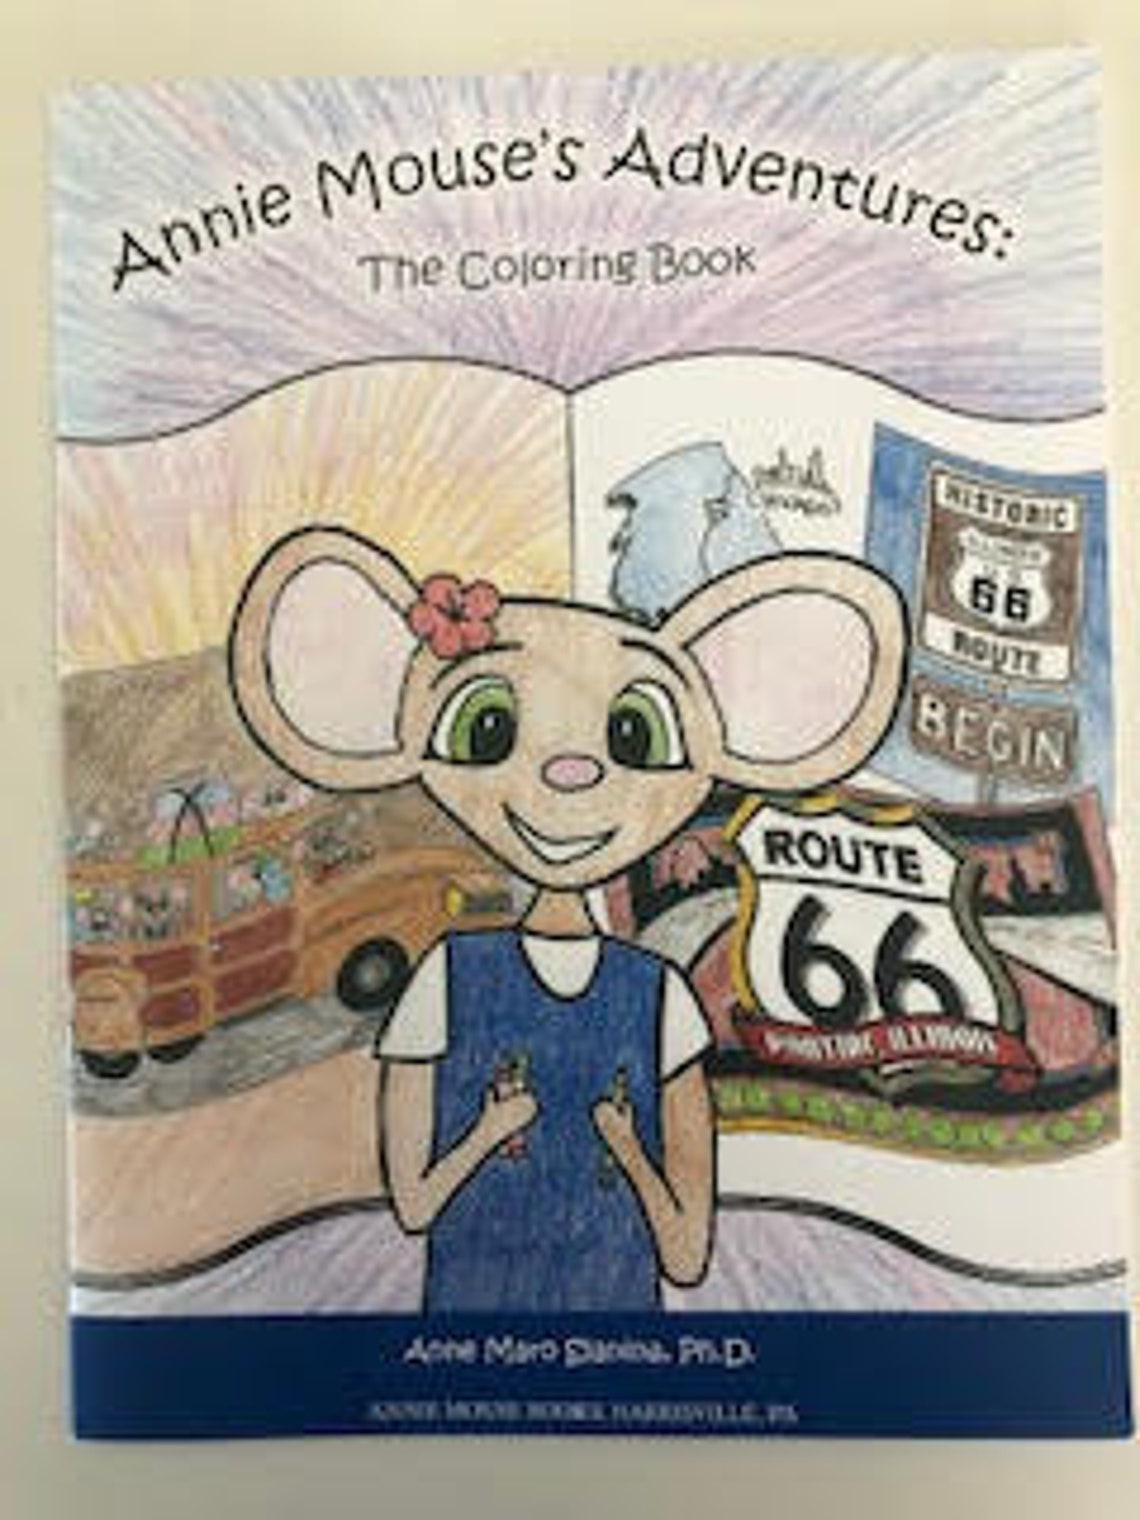 The Adventures of Annie Mouse by Anne M. Slanina